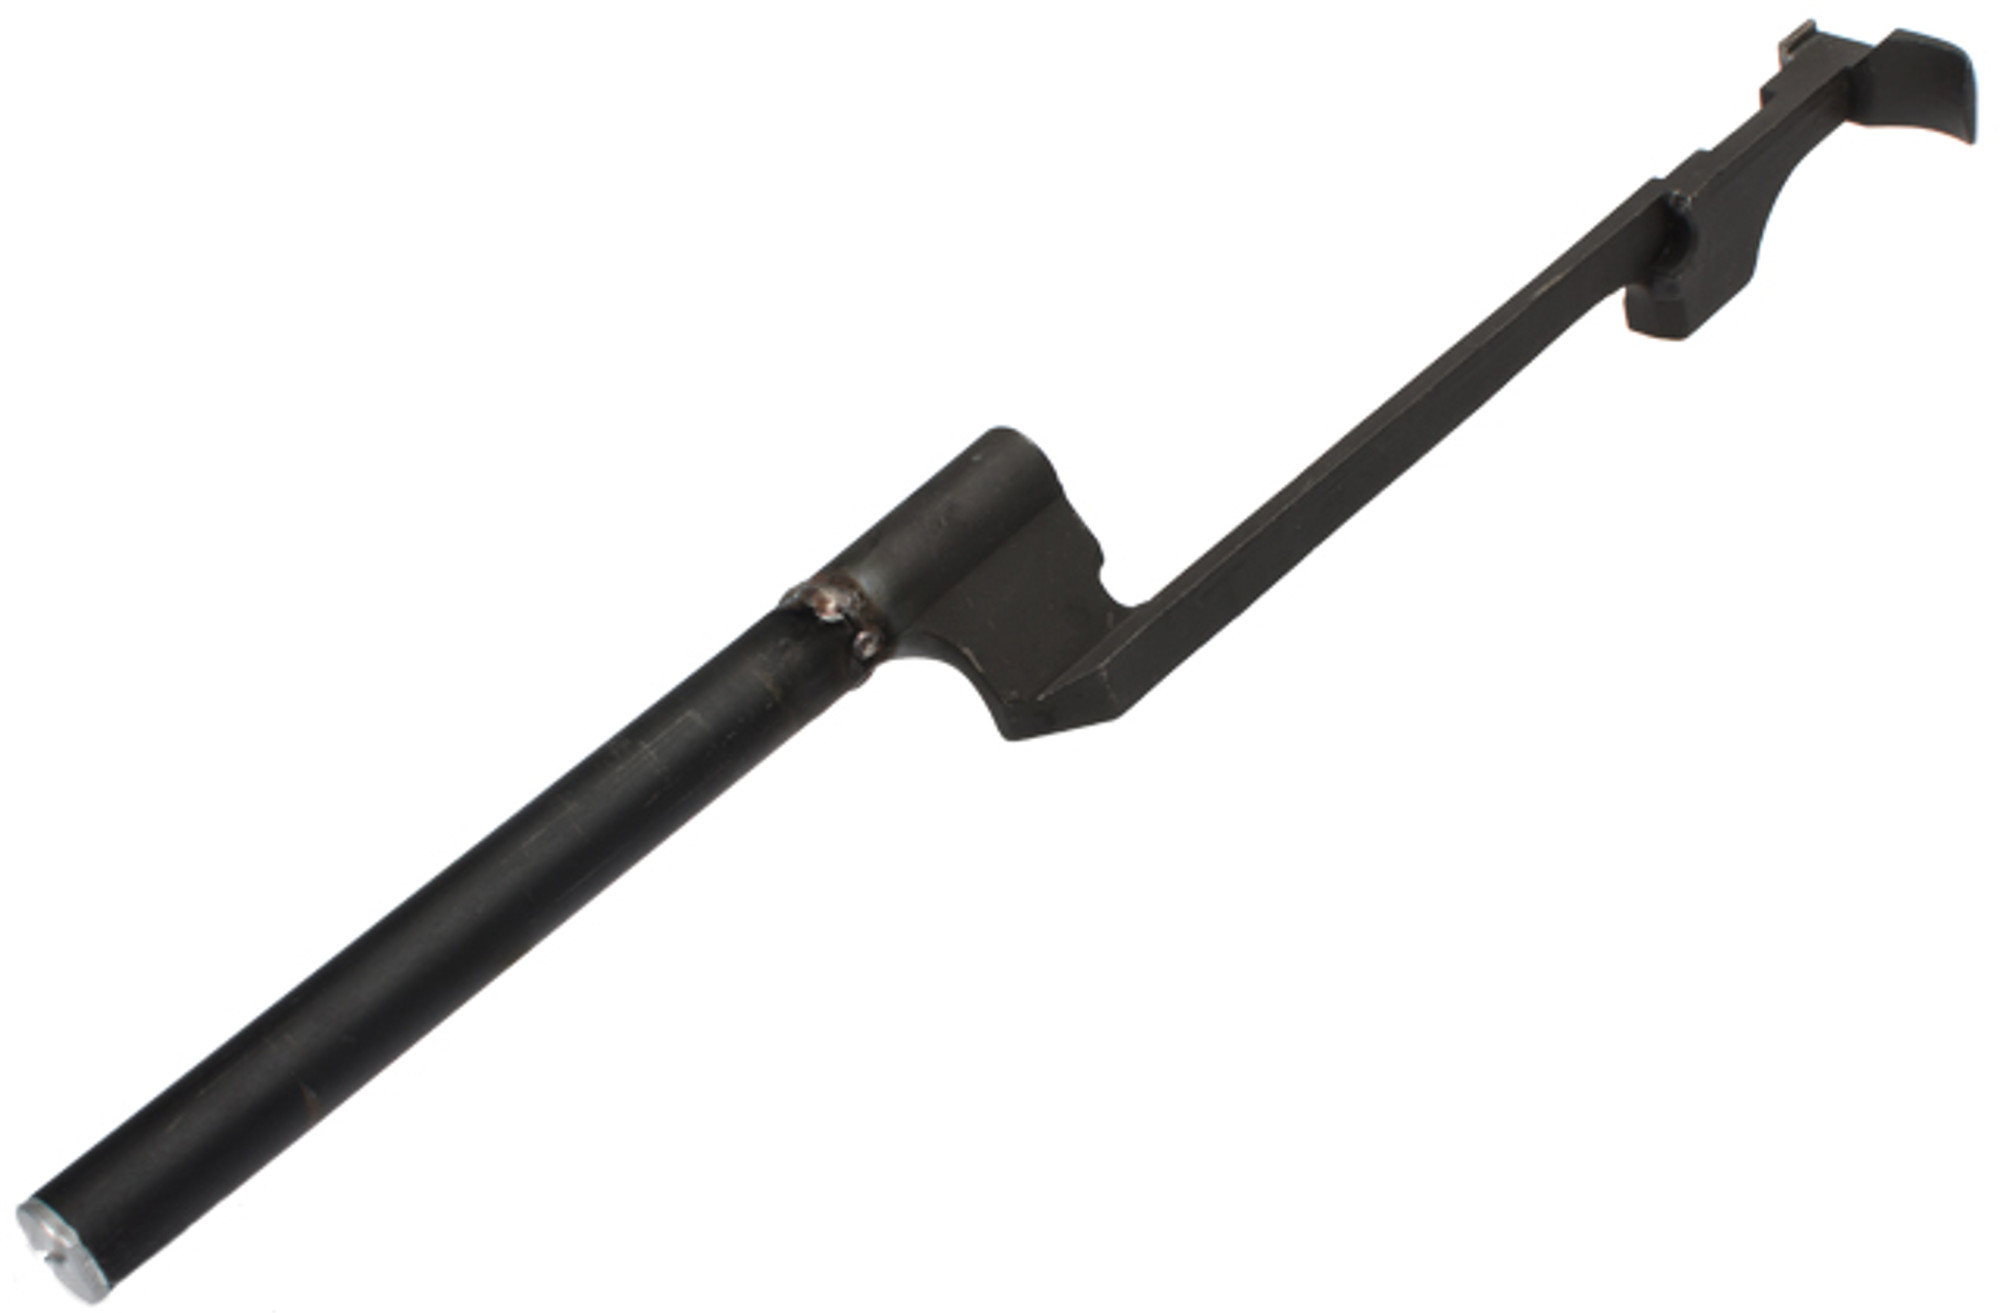 WE-Tech Metal Charging Handle for WE M14 Airsoft GBB Rifles